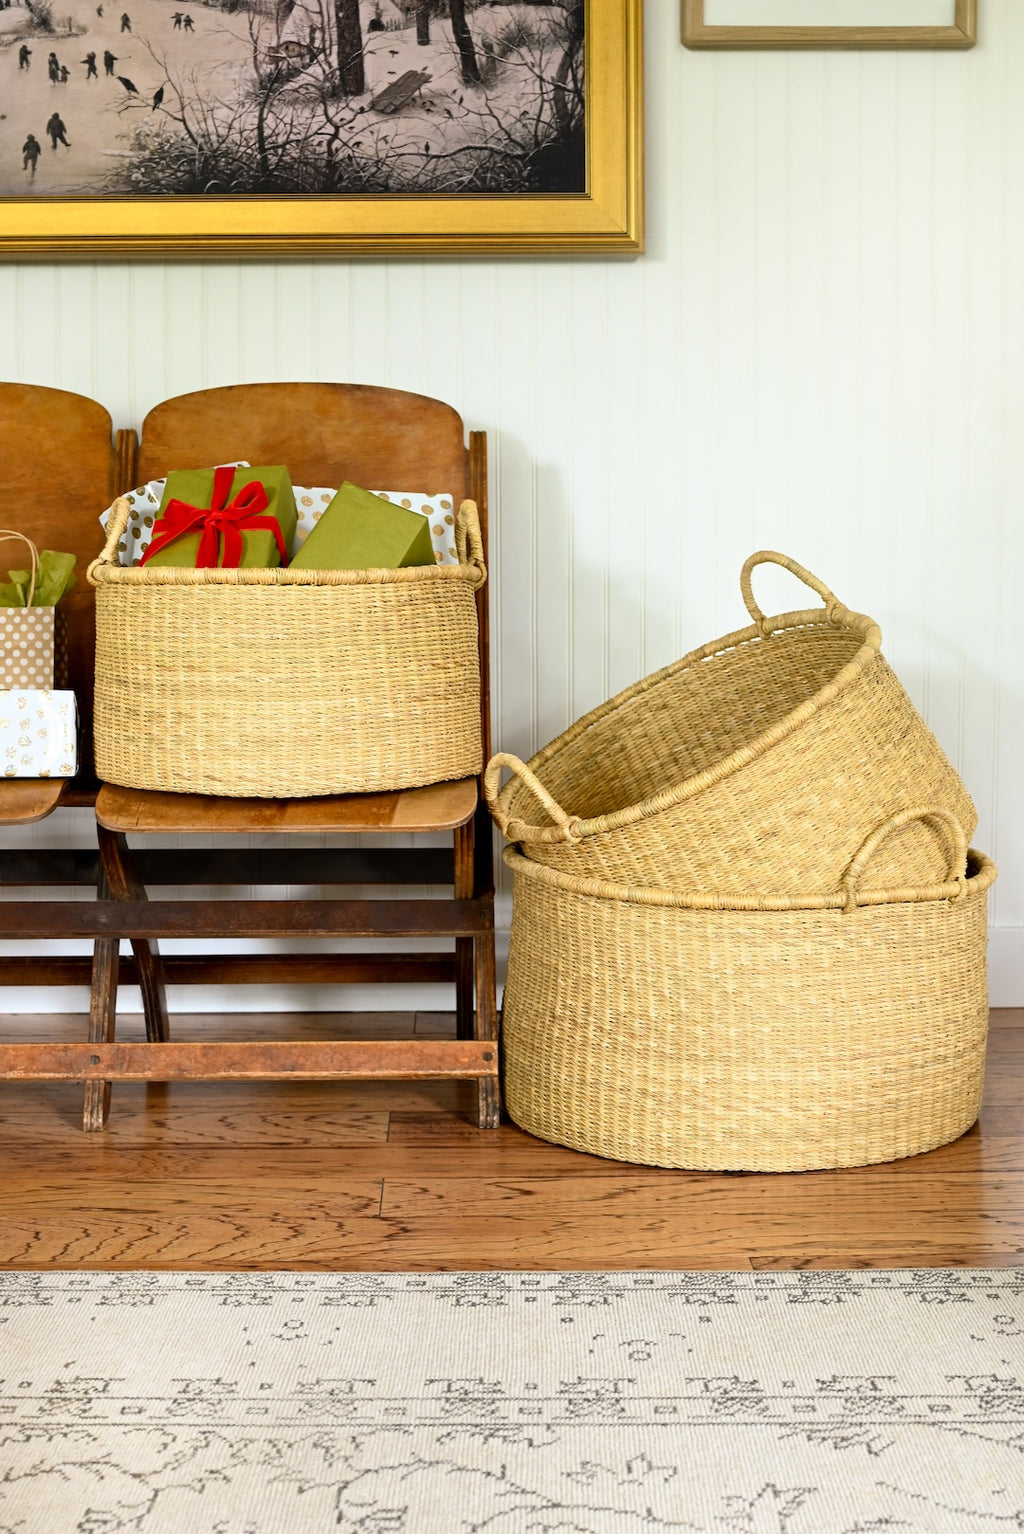 Set of Three Natural Woven Grass Floor Baskets with Handles